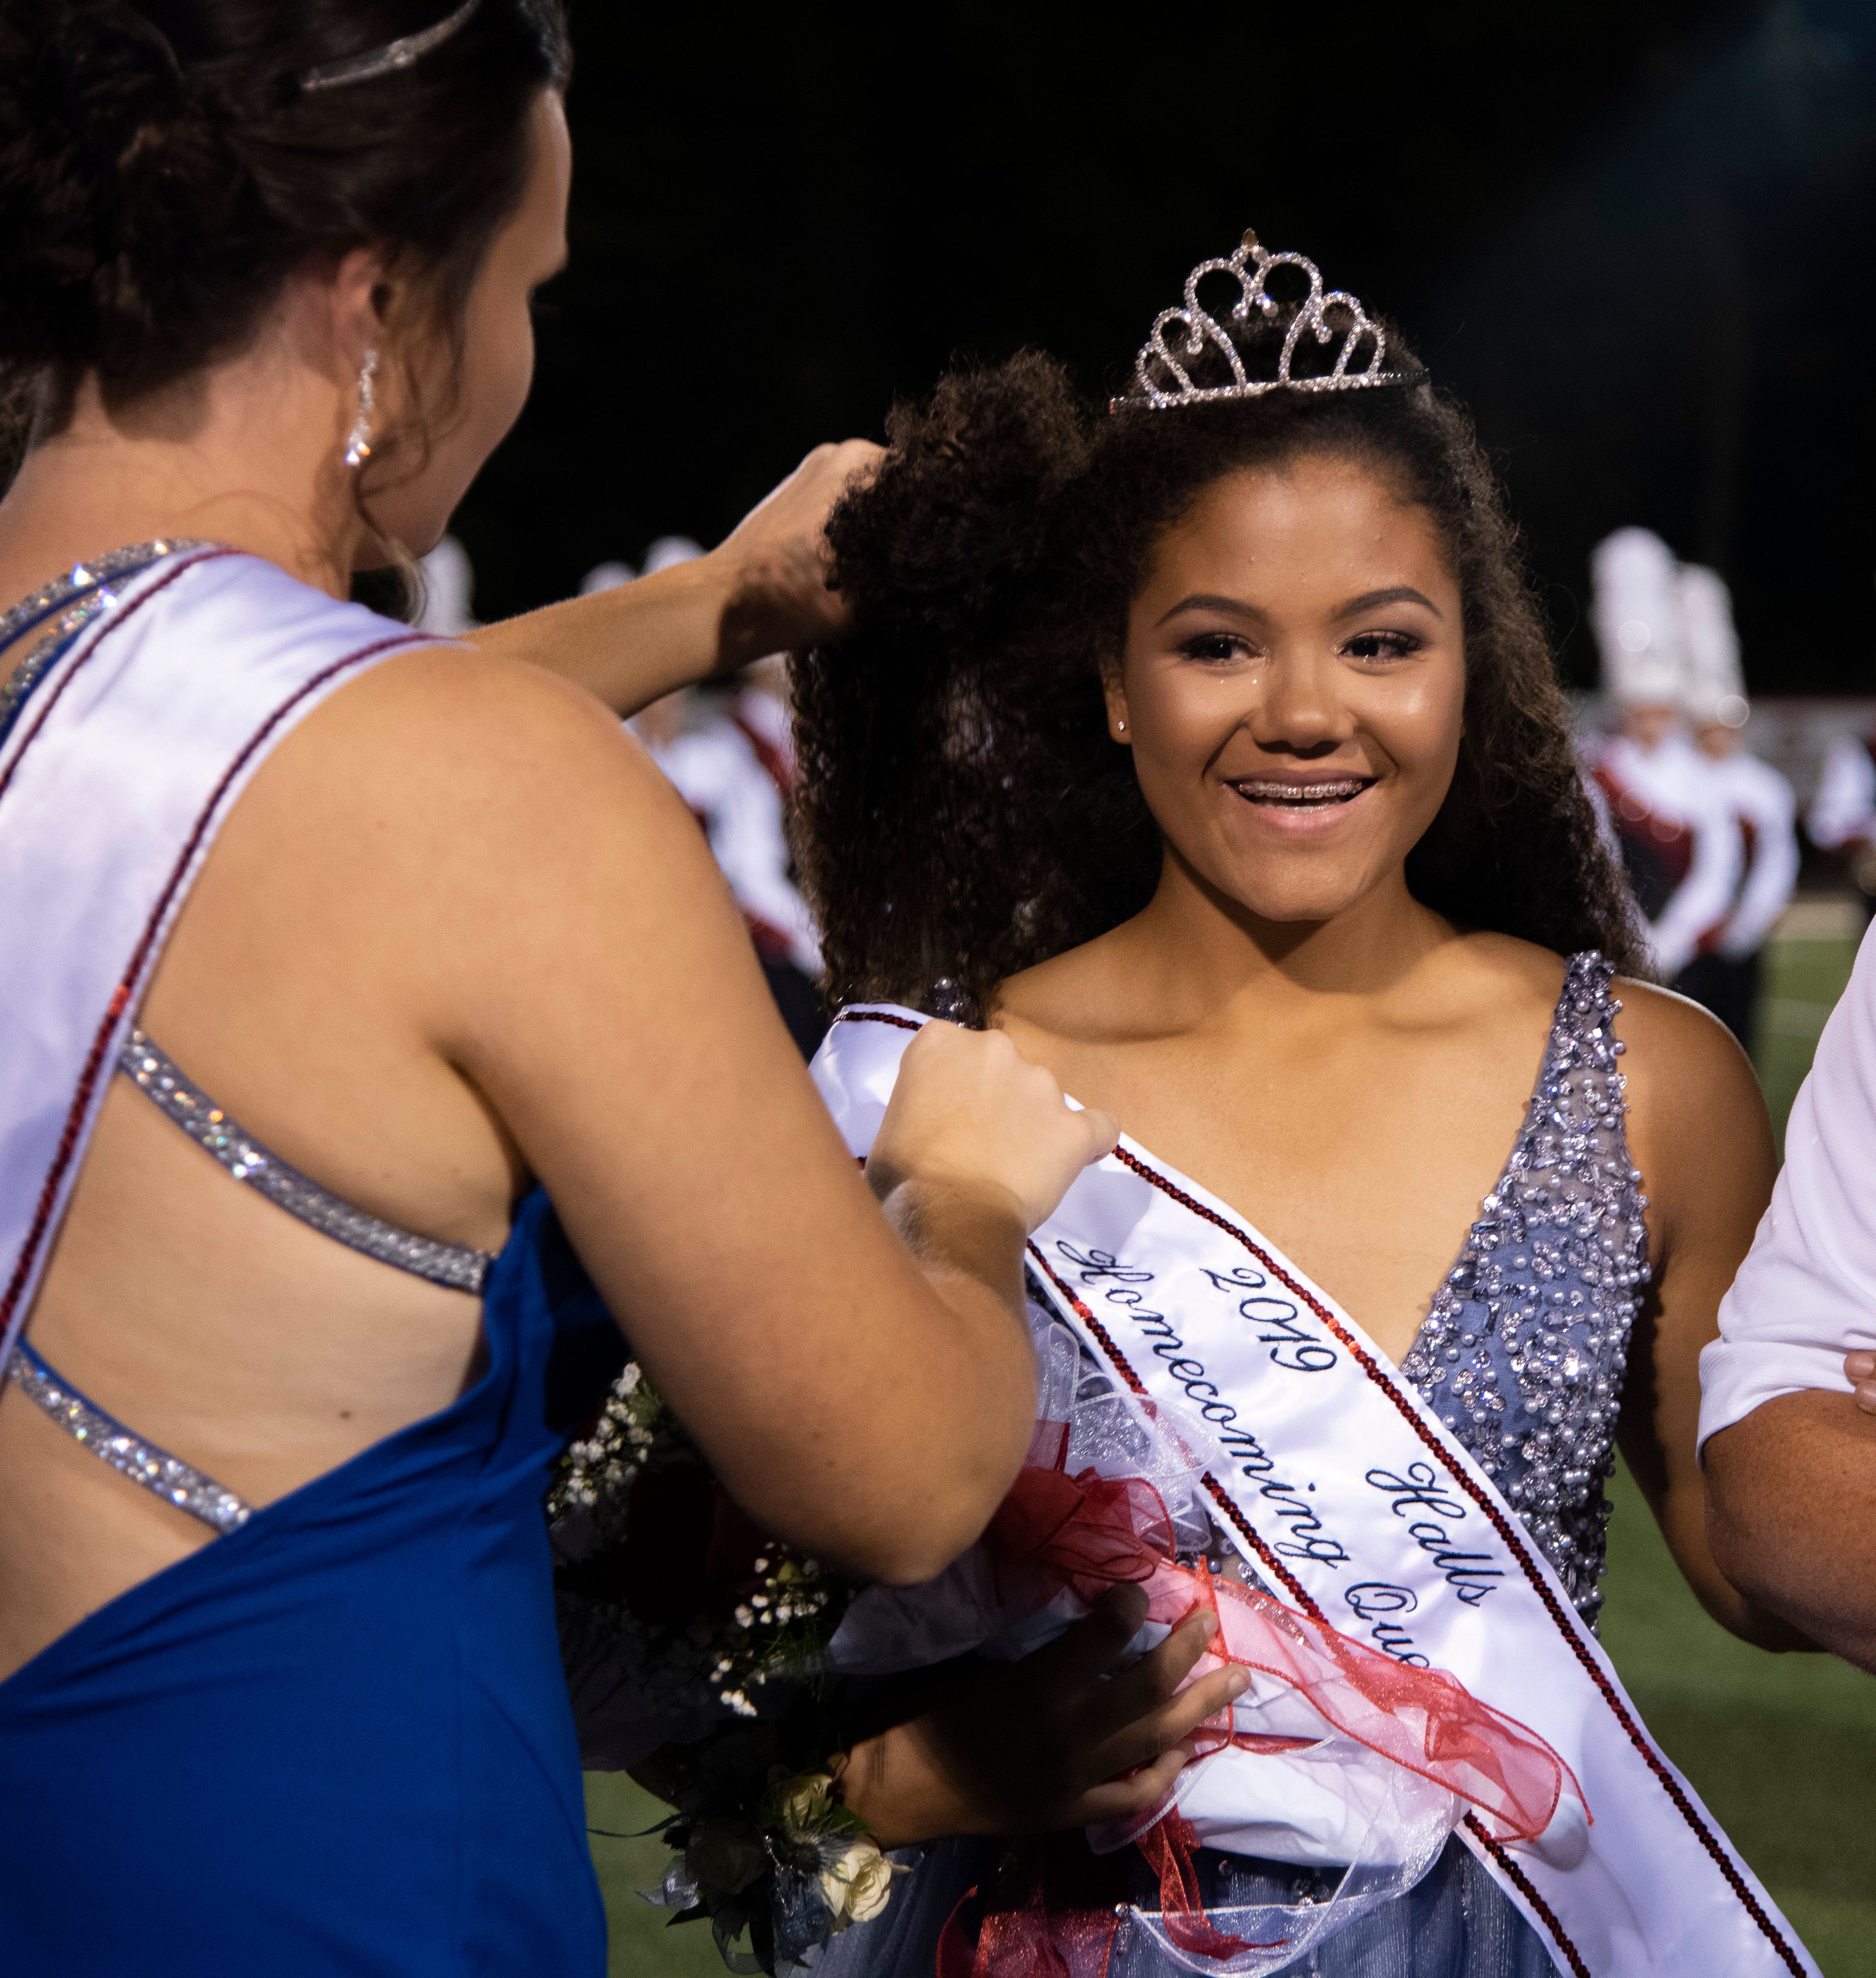 Brianna McMill receives homecoming queen the during the Halls and Central high school football game Friday, Oct. 4, 2019, at Halls High School.